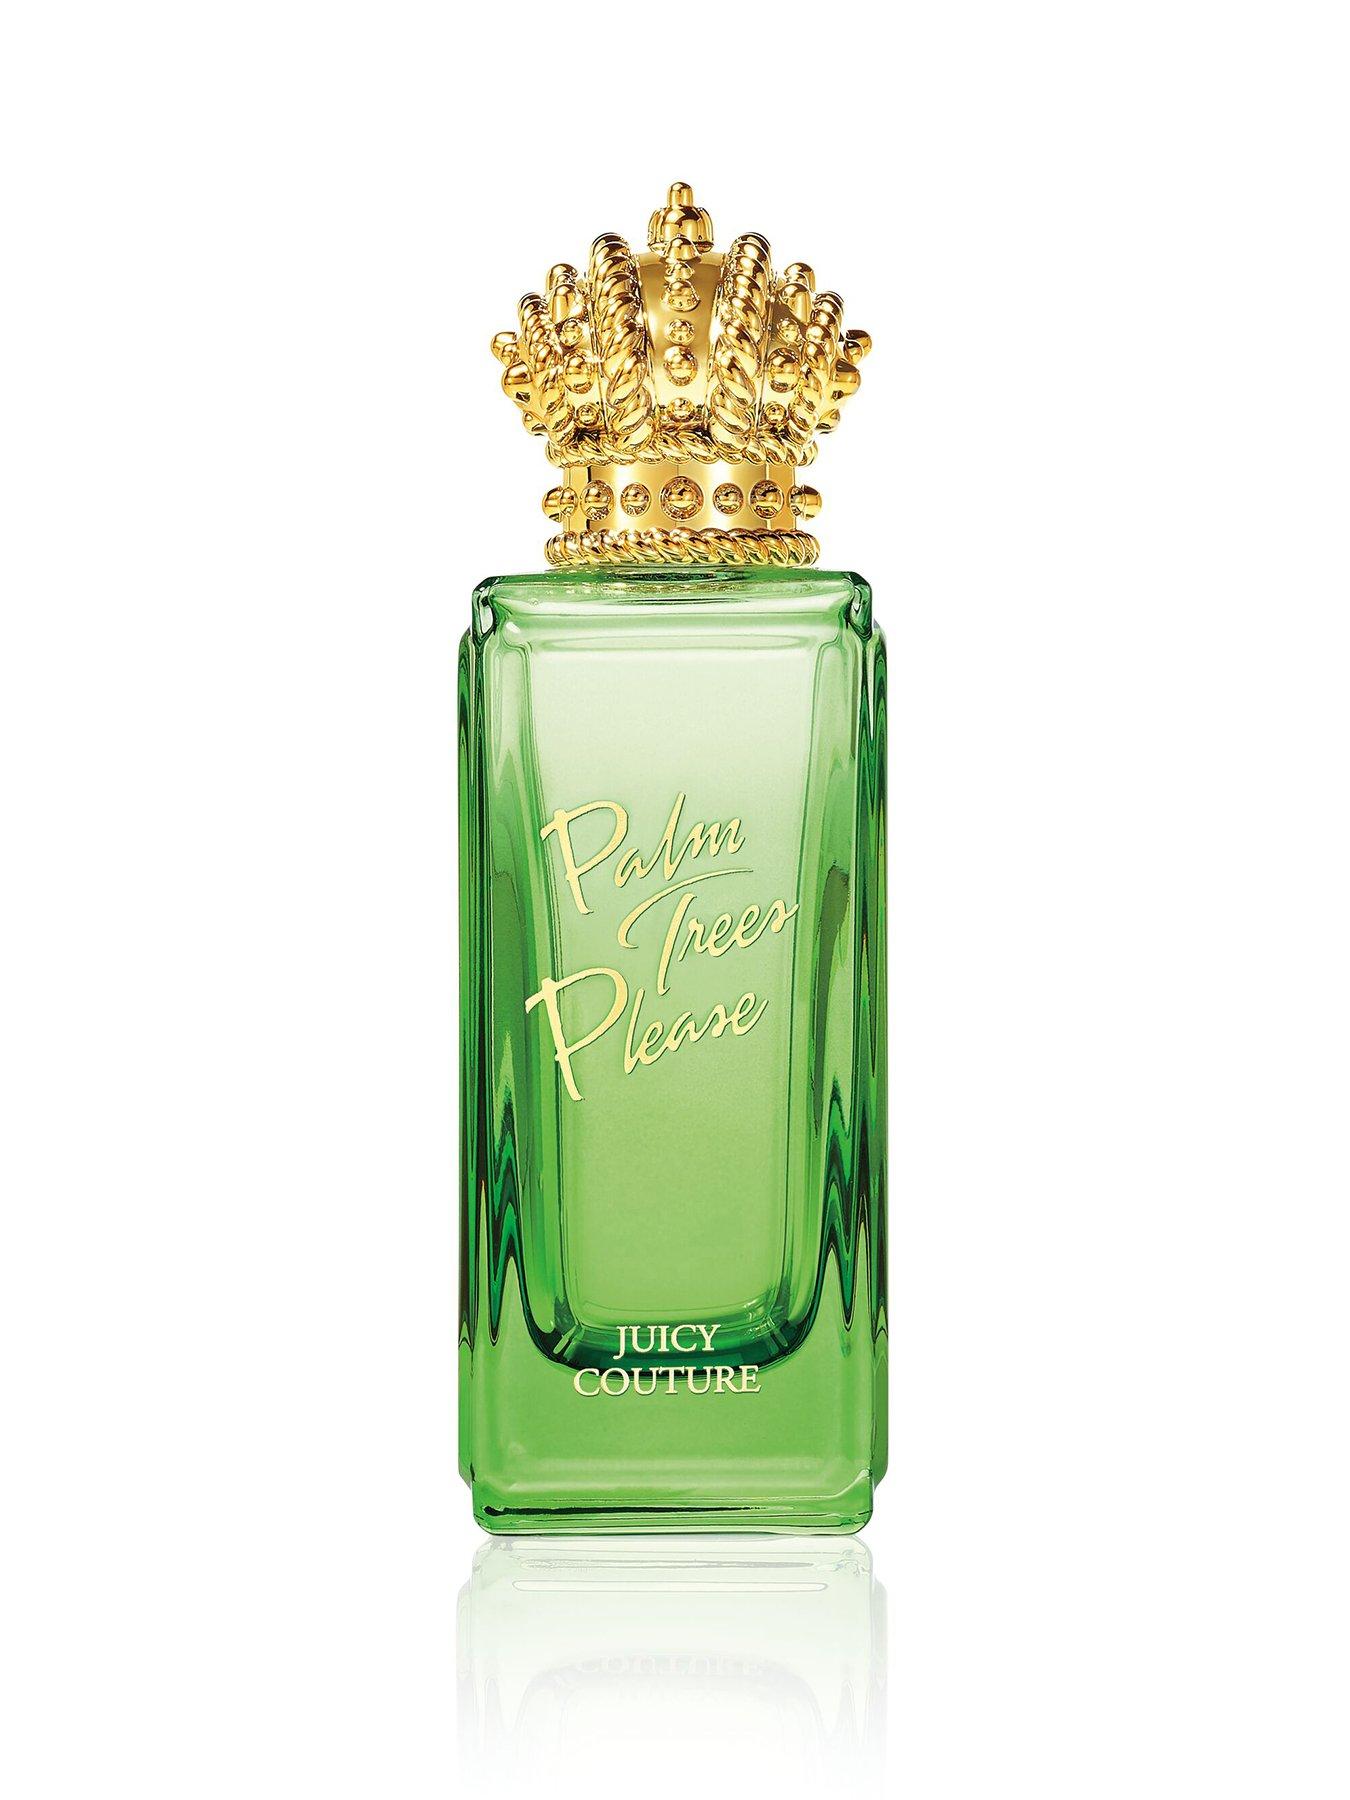 Juicy Couture Palm Trees Please 75ml Limited Edition Fragrance | very.co.uk